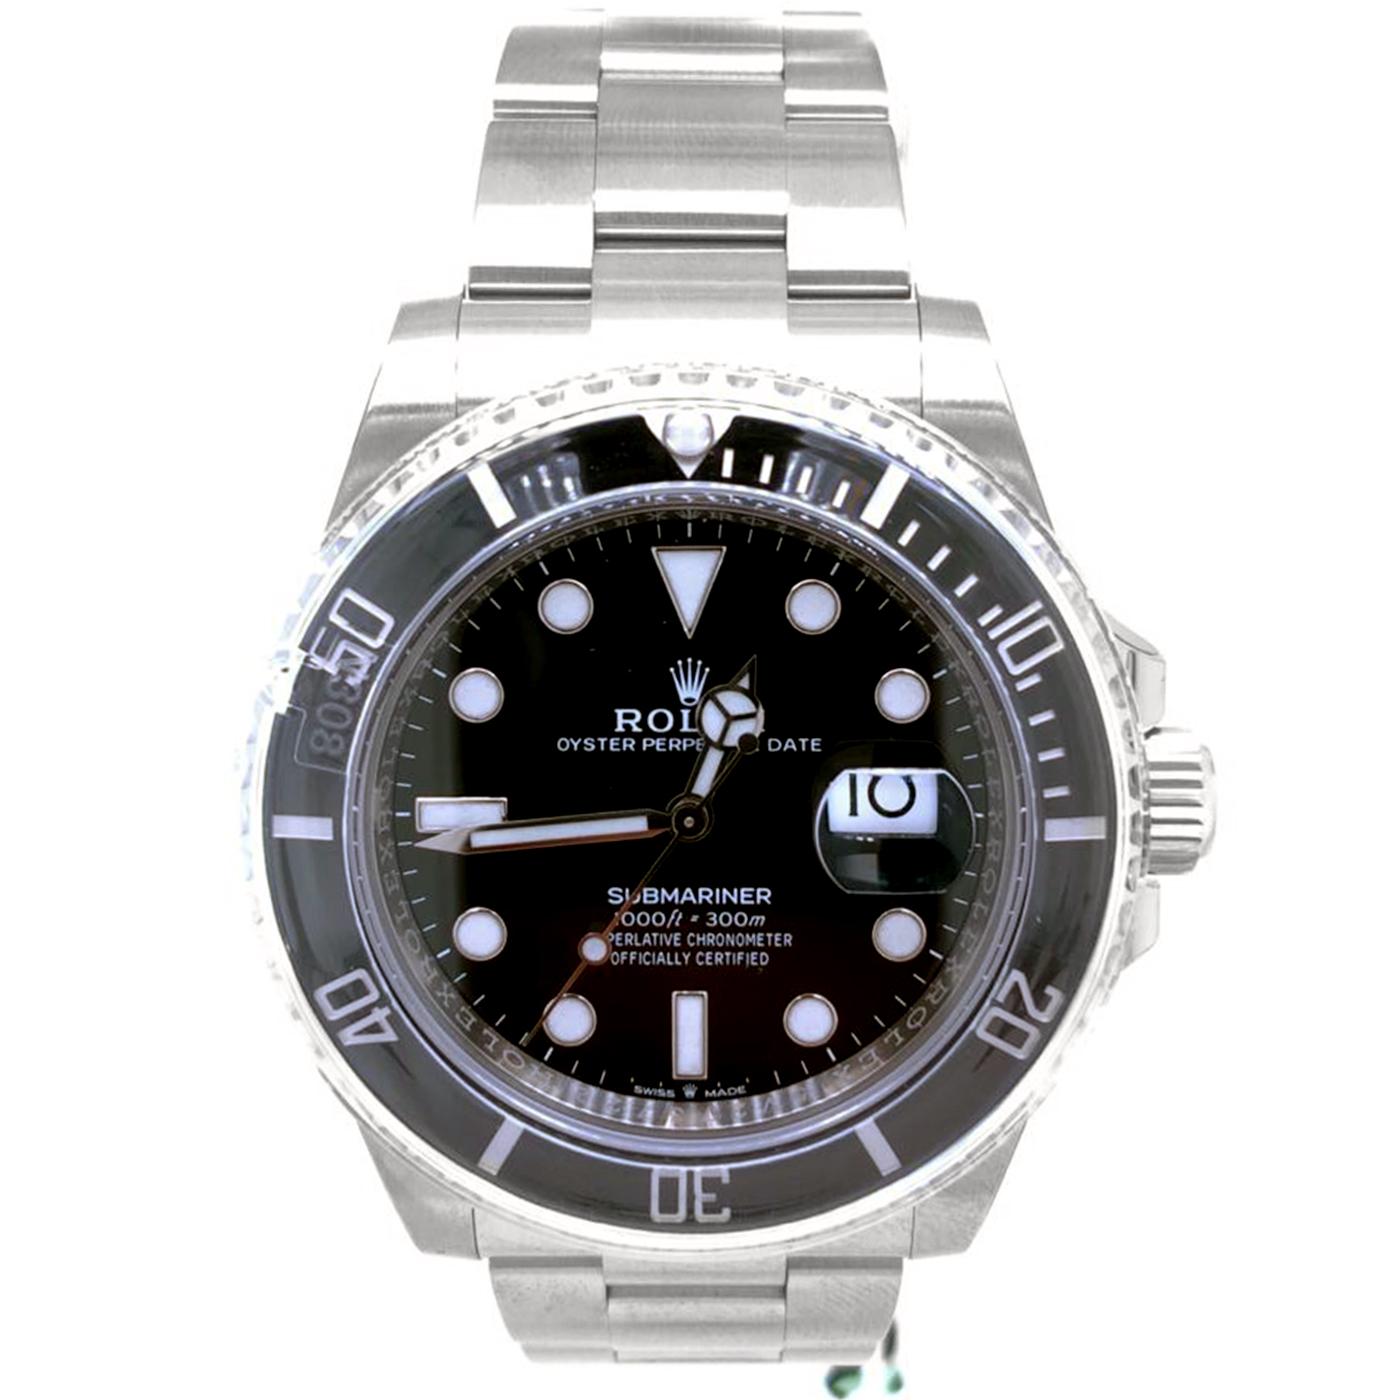 The Oyster Perpetual Submariner is a reference among divers’ watches; it is the watch that unlocked the deep. Launched in 1953, the Submariner was the first divers’ wristwatch waterproof to a depth of 100 meters (330 feet). This was the second great